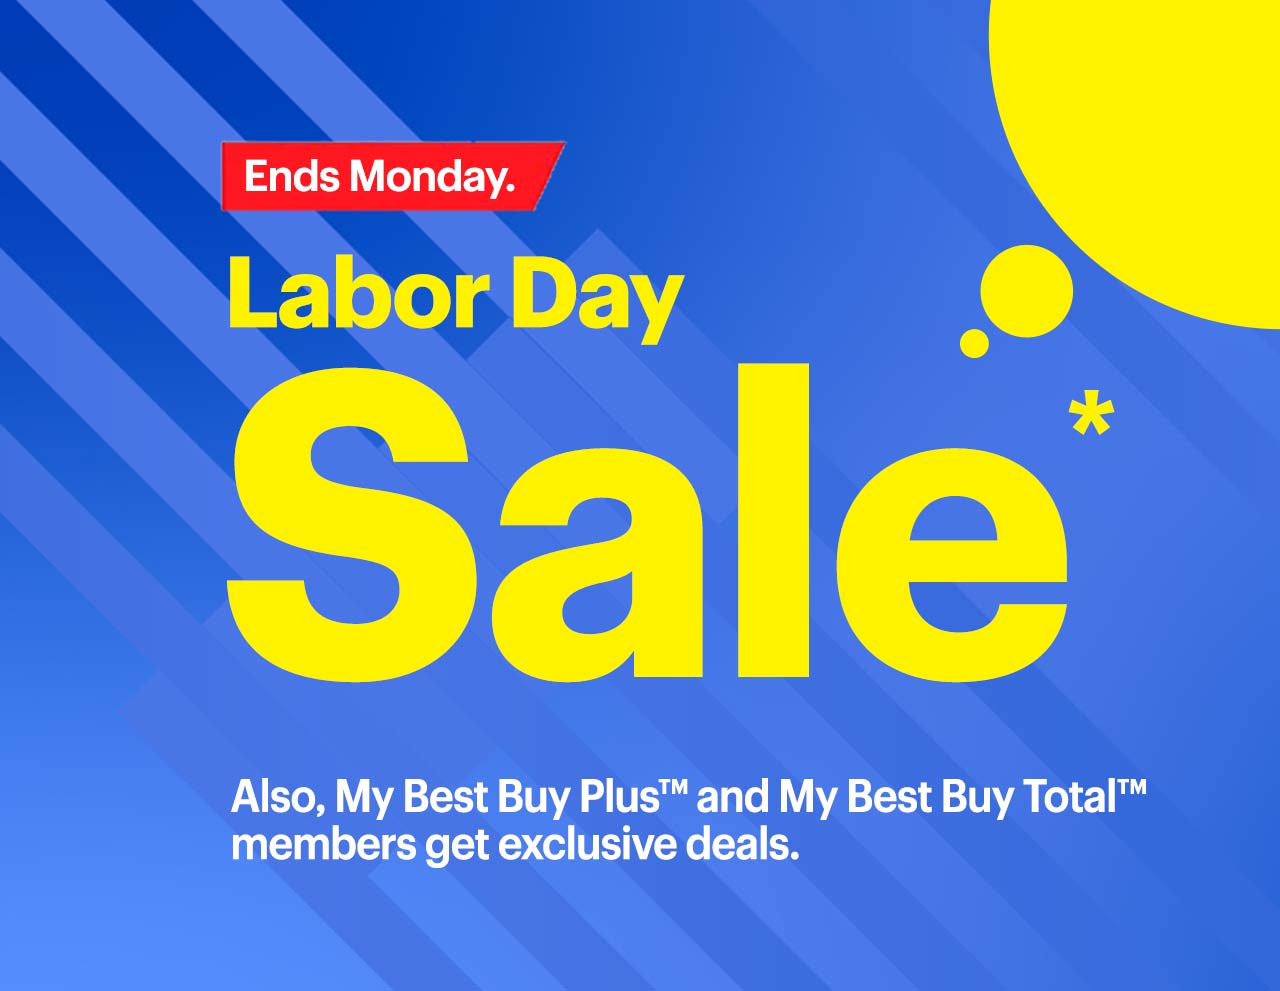 Labor Day Sale. Also, My Best Buy Plus™ and My Best Buy Total™ members get exclusive deals. Ends Monday. Reference disclaimer.